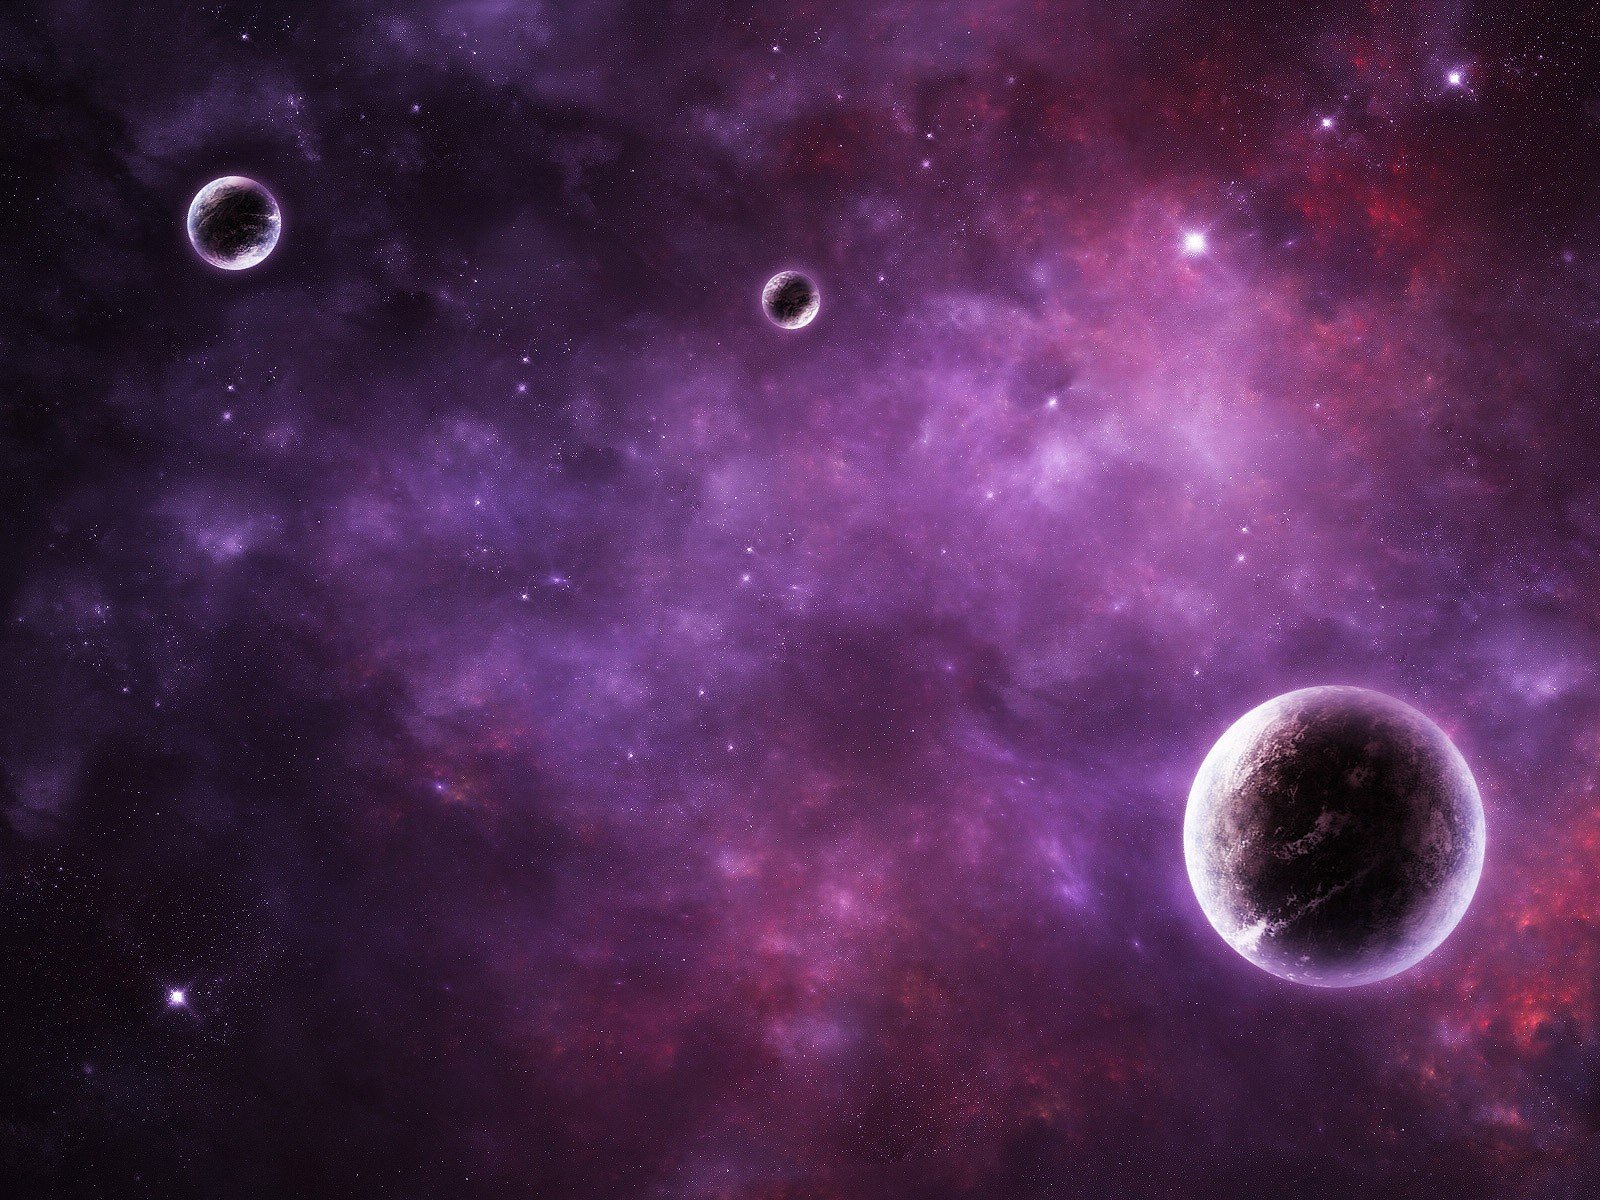 outer, Space, Stars, Pink, Galaxies, Planets, Purple, Nebulae Wallpaper